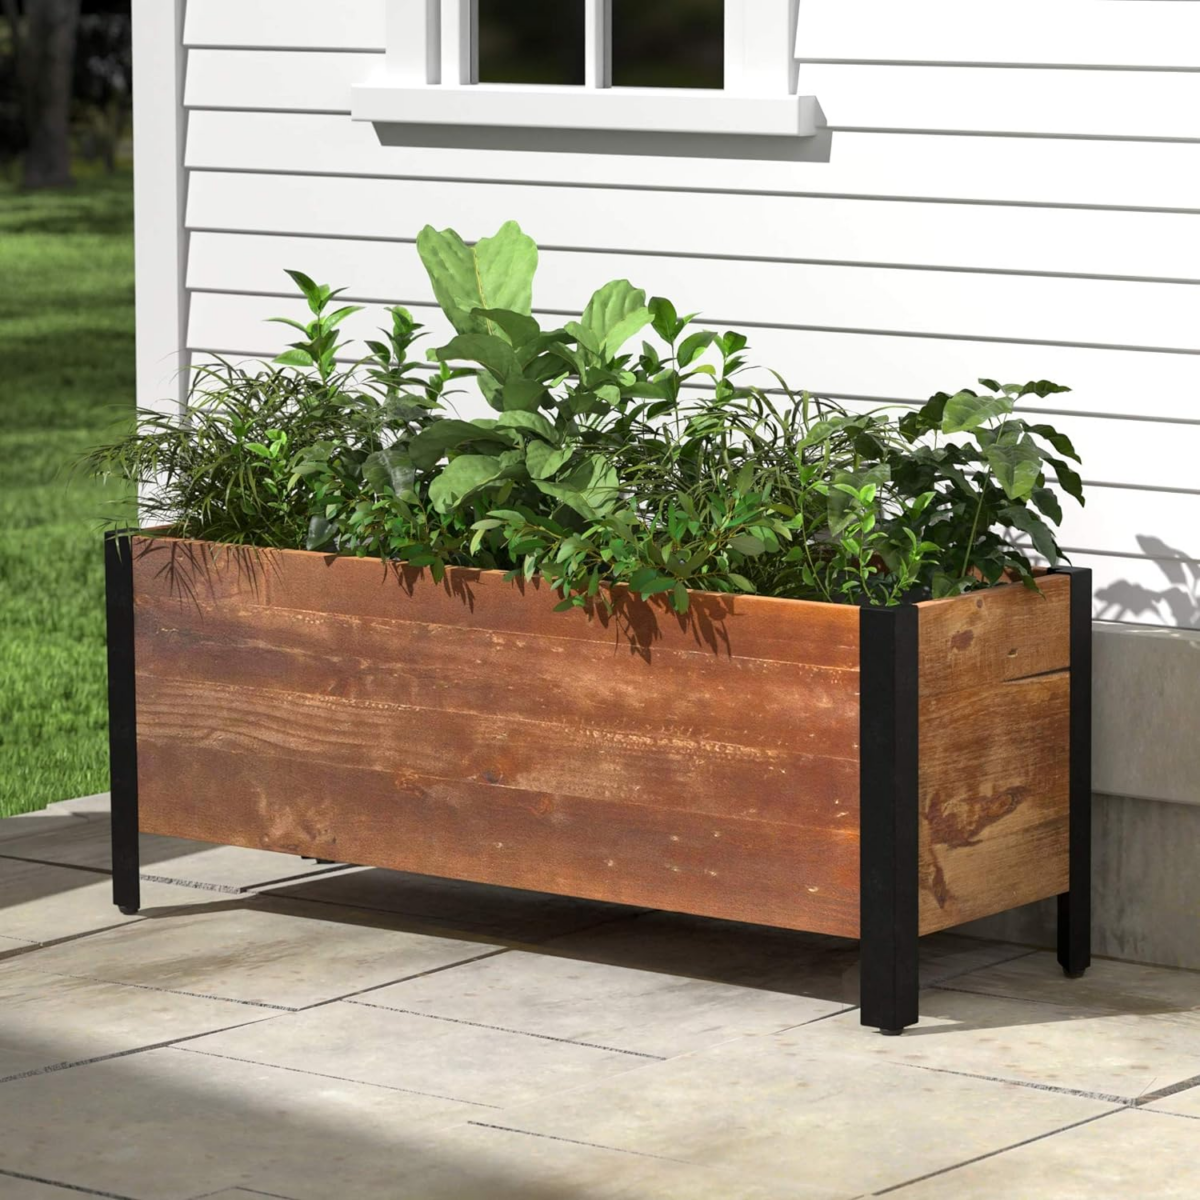 Wood Plant Containers